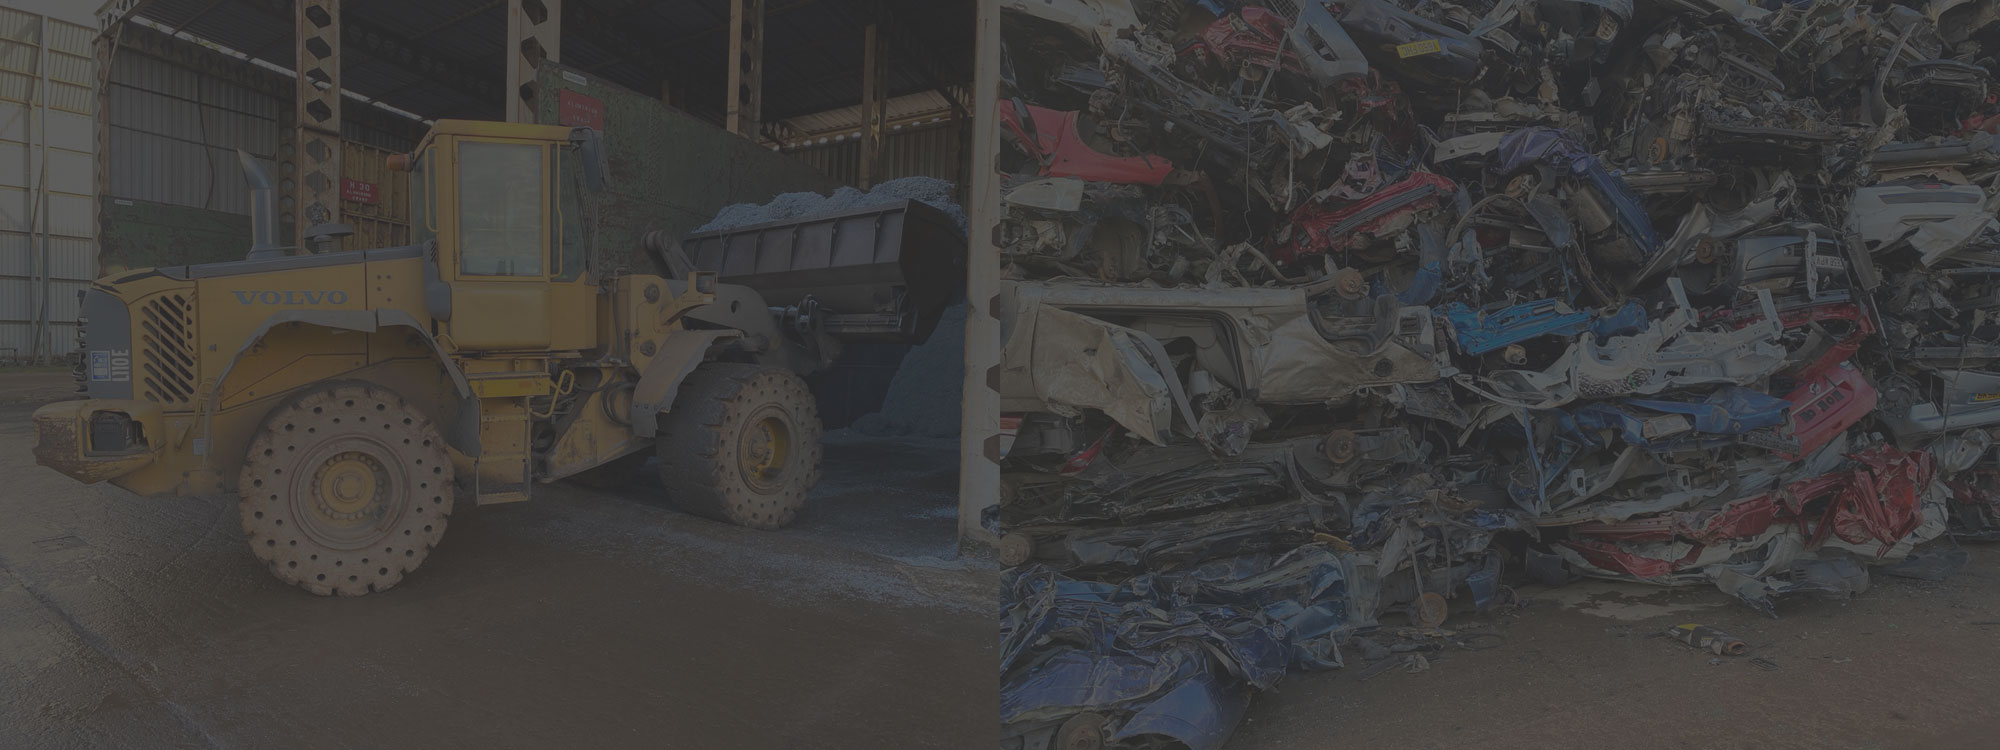 Scrap Metal Recycling for Luton and surrounding areas